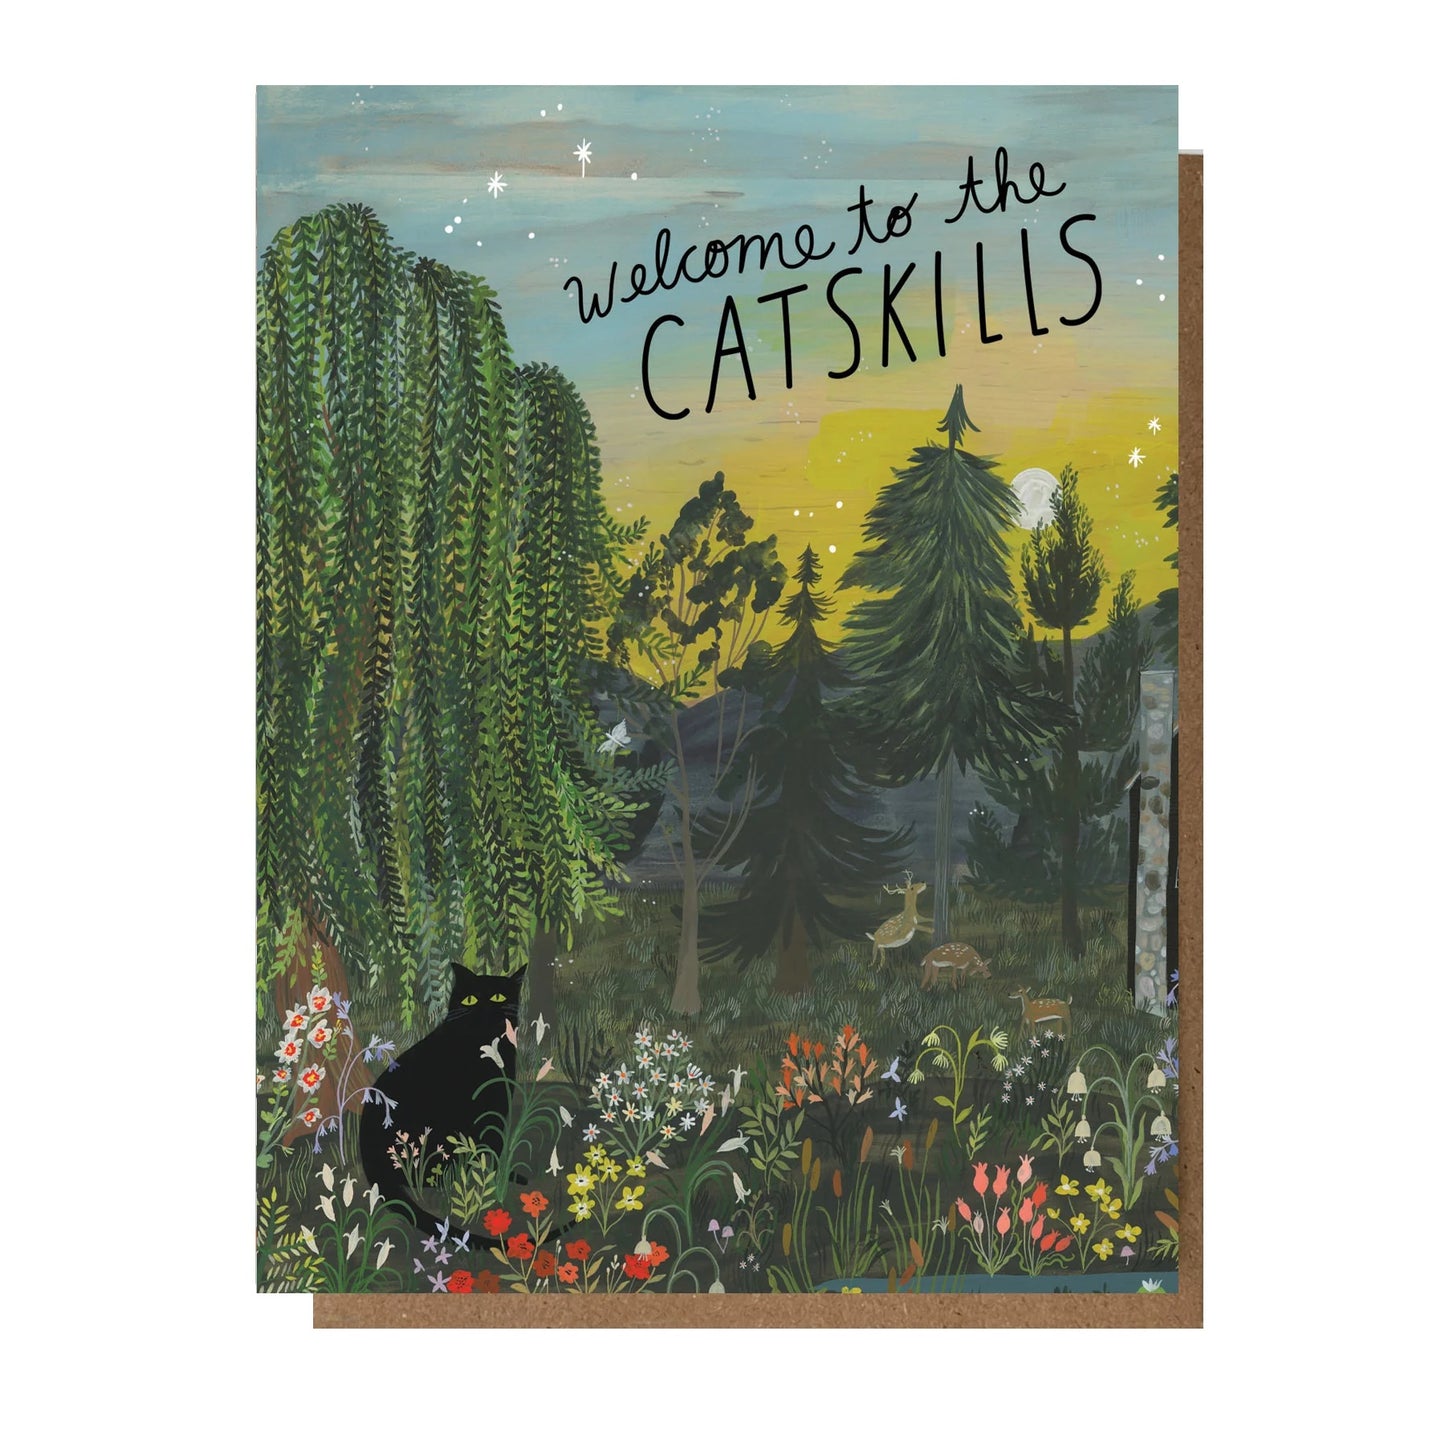 Folding card with illustration of an enchanted forrest with Welcome to the Catskills written above